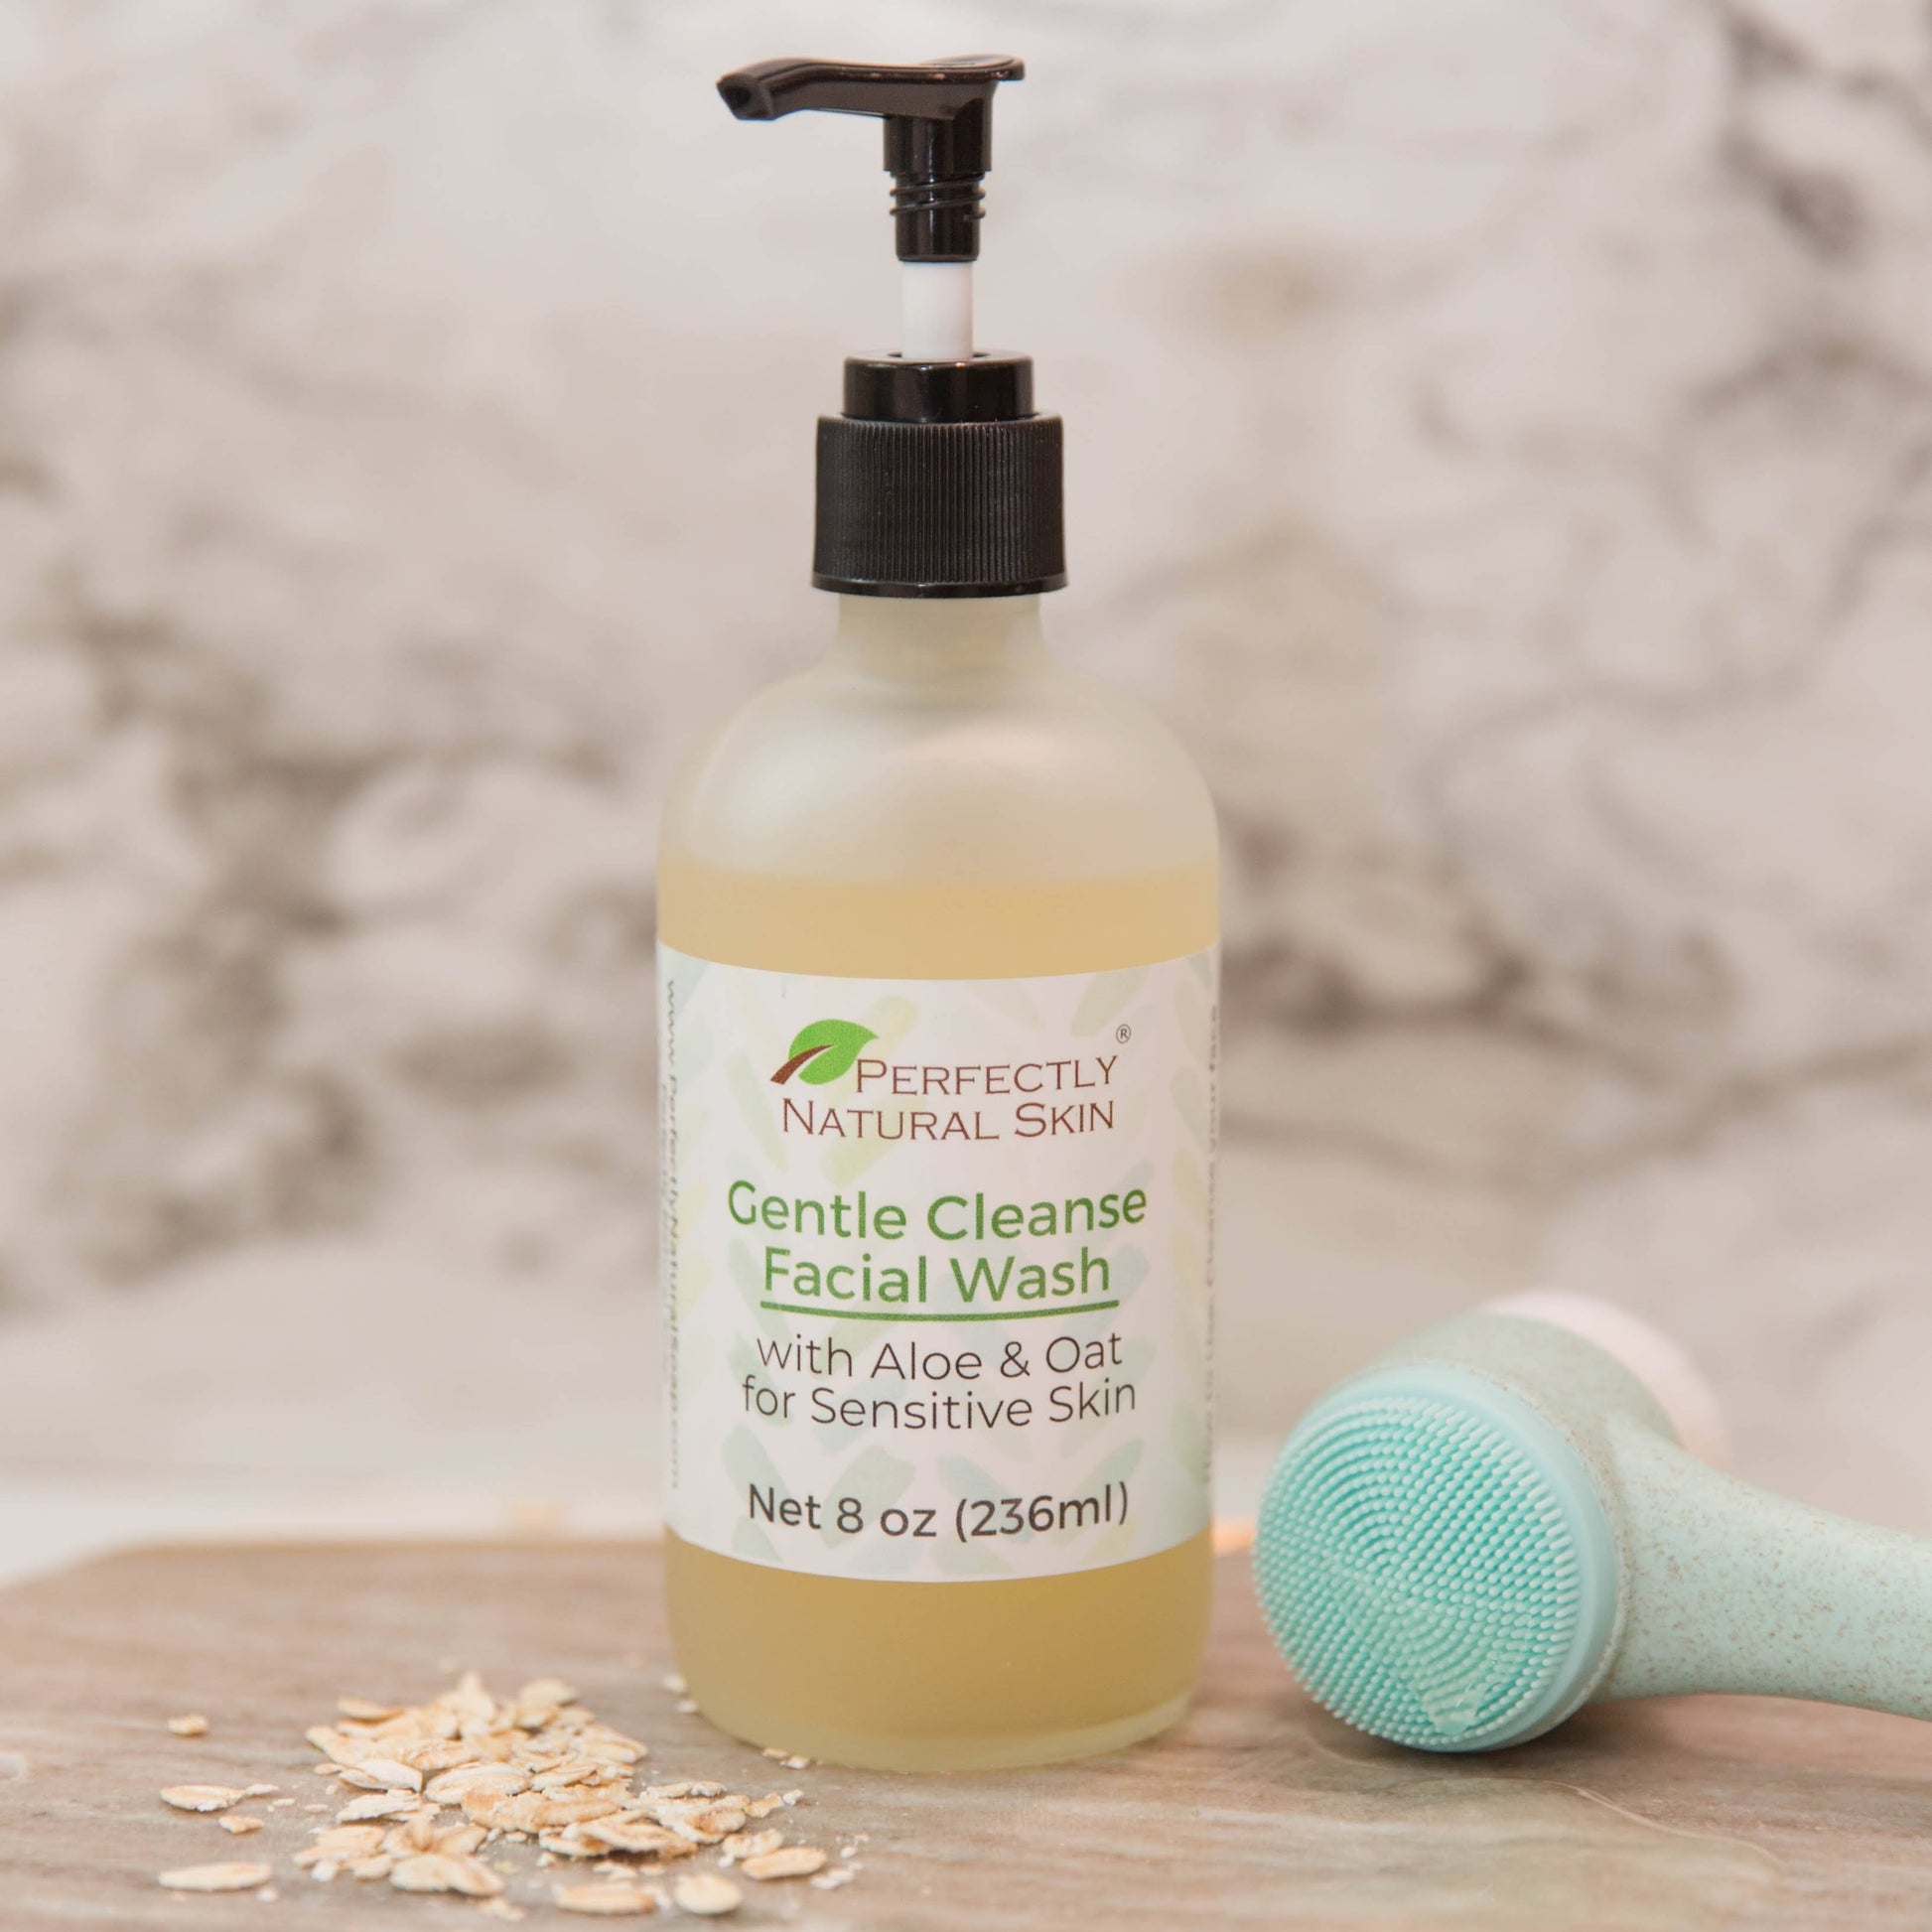 Gentle Cleanse Facial Wash with Aloe & Oat, 8 oz-Facial Care-Perfectly Natural Soap